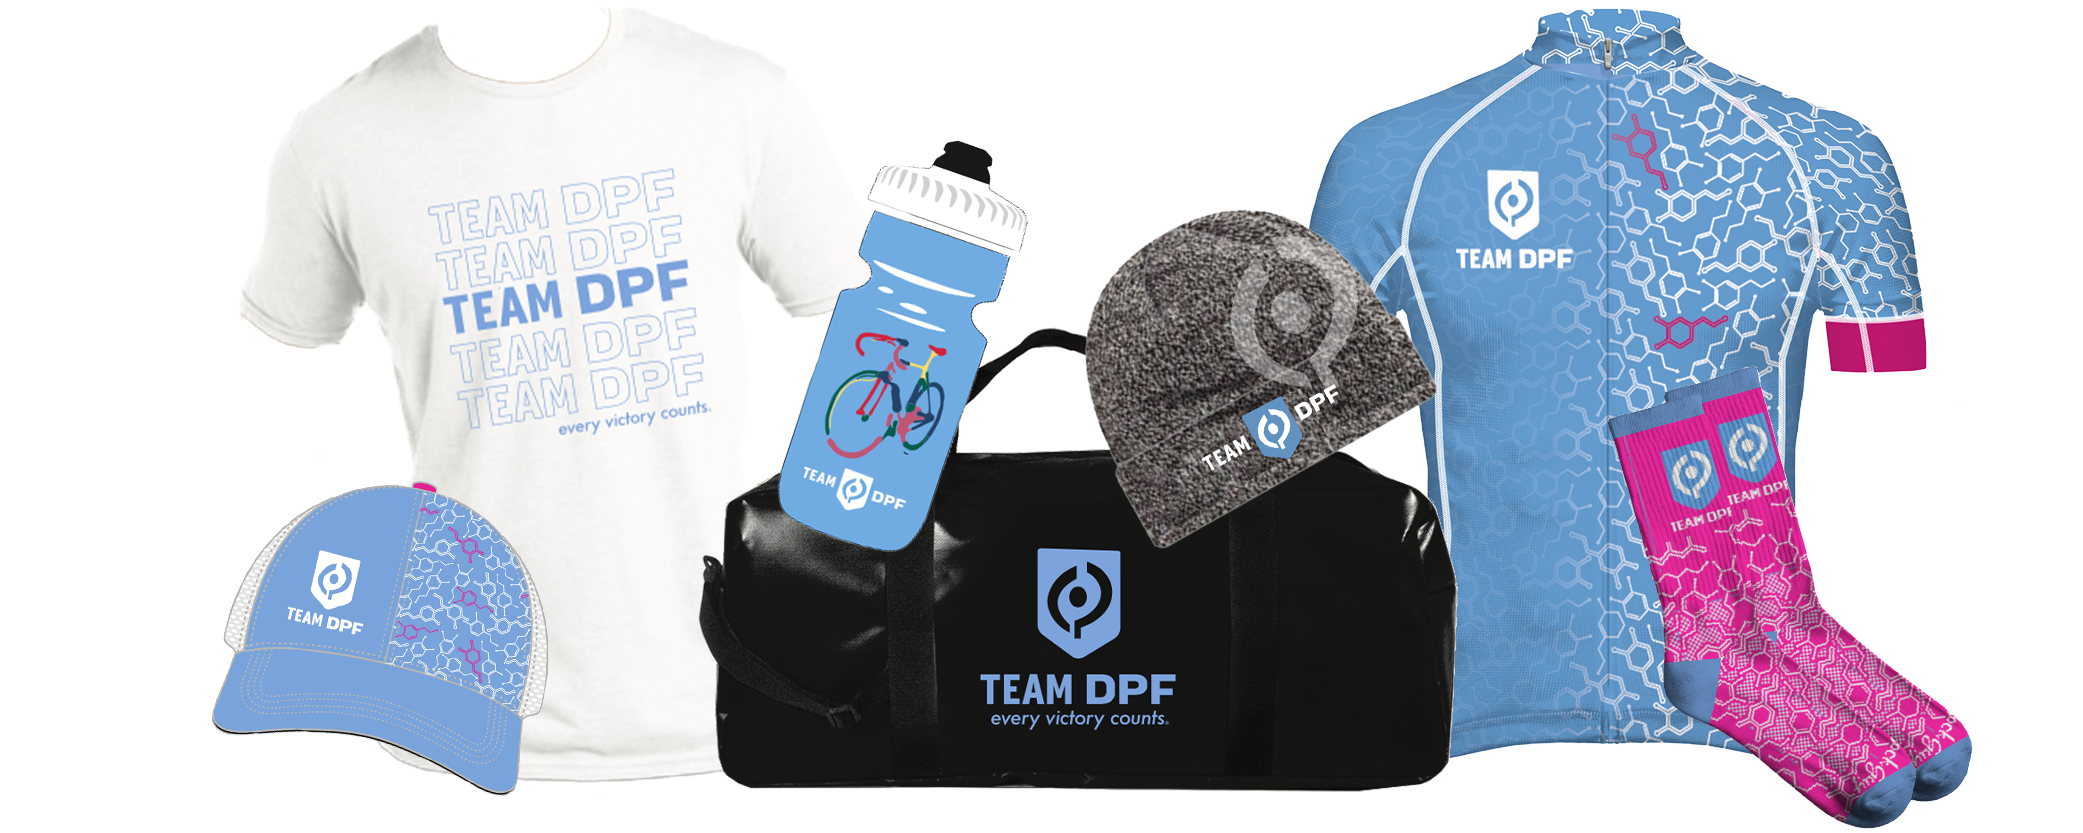 Team DPF Cycling Events Incentives